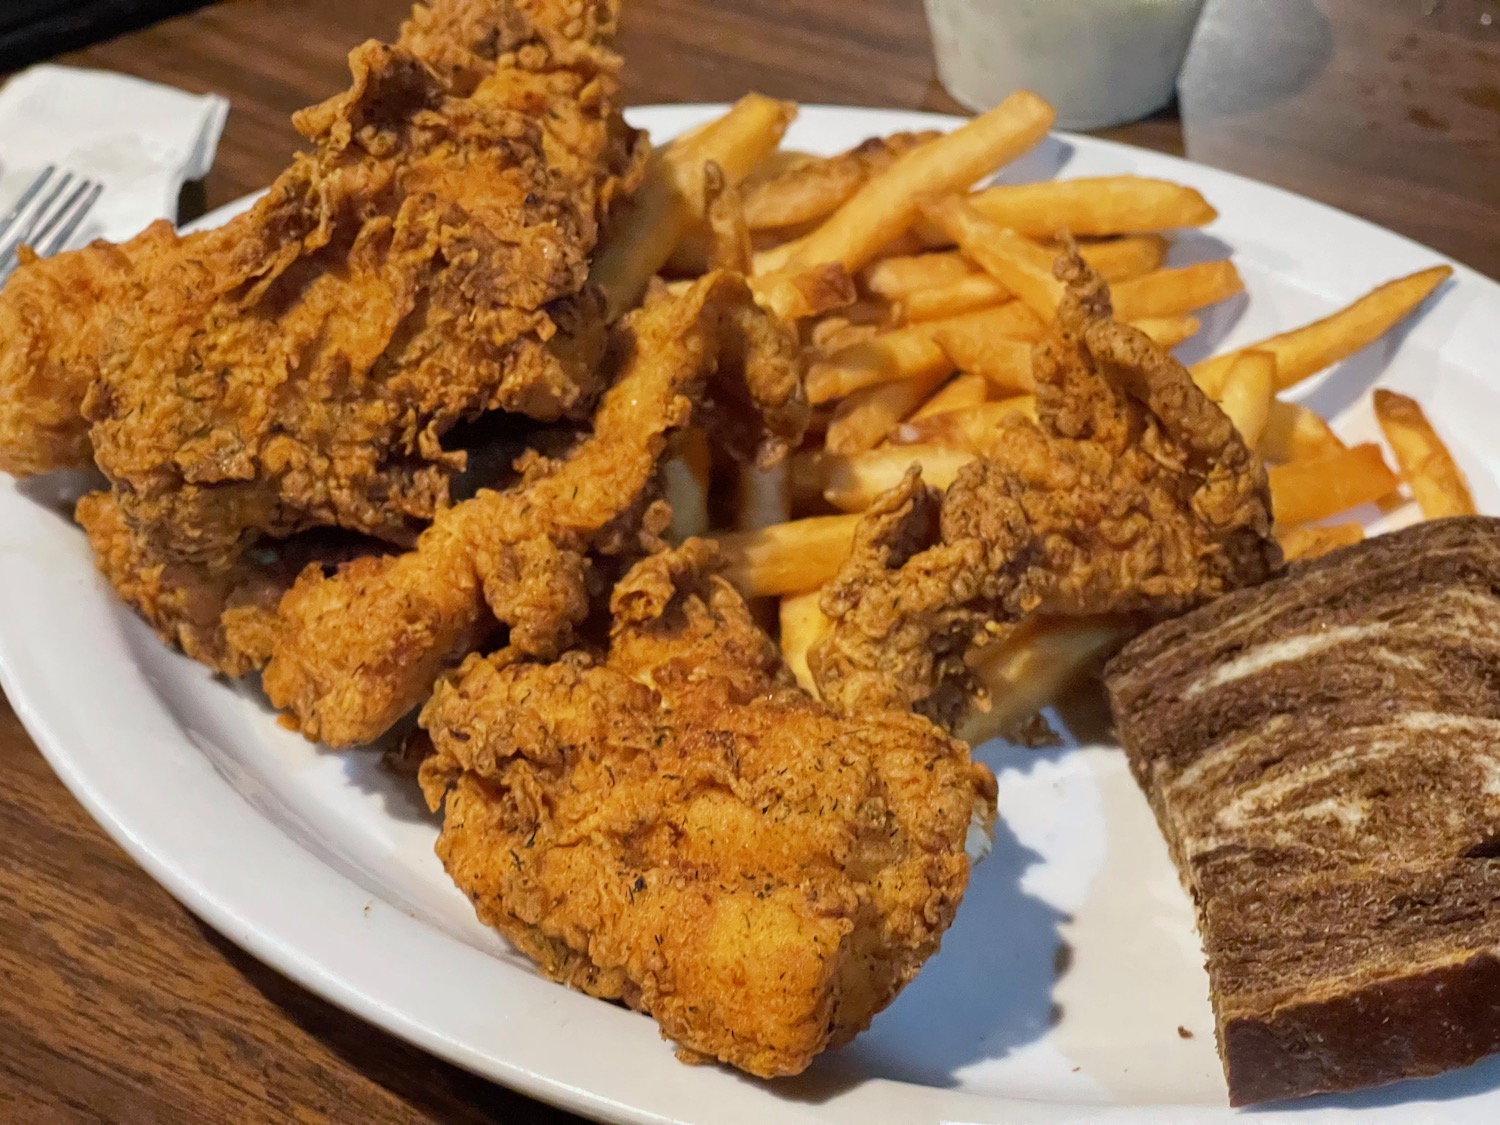 a plate of fried chicken and fries